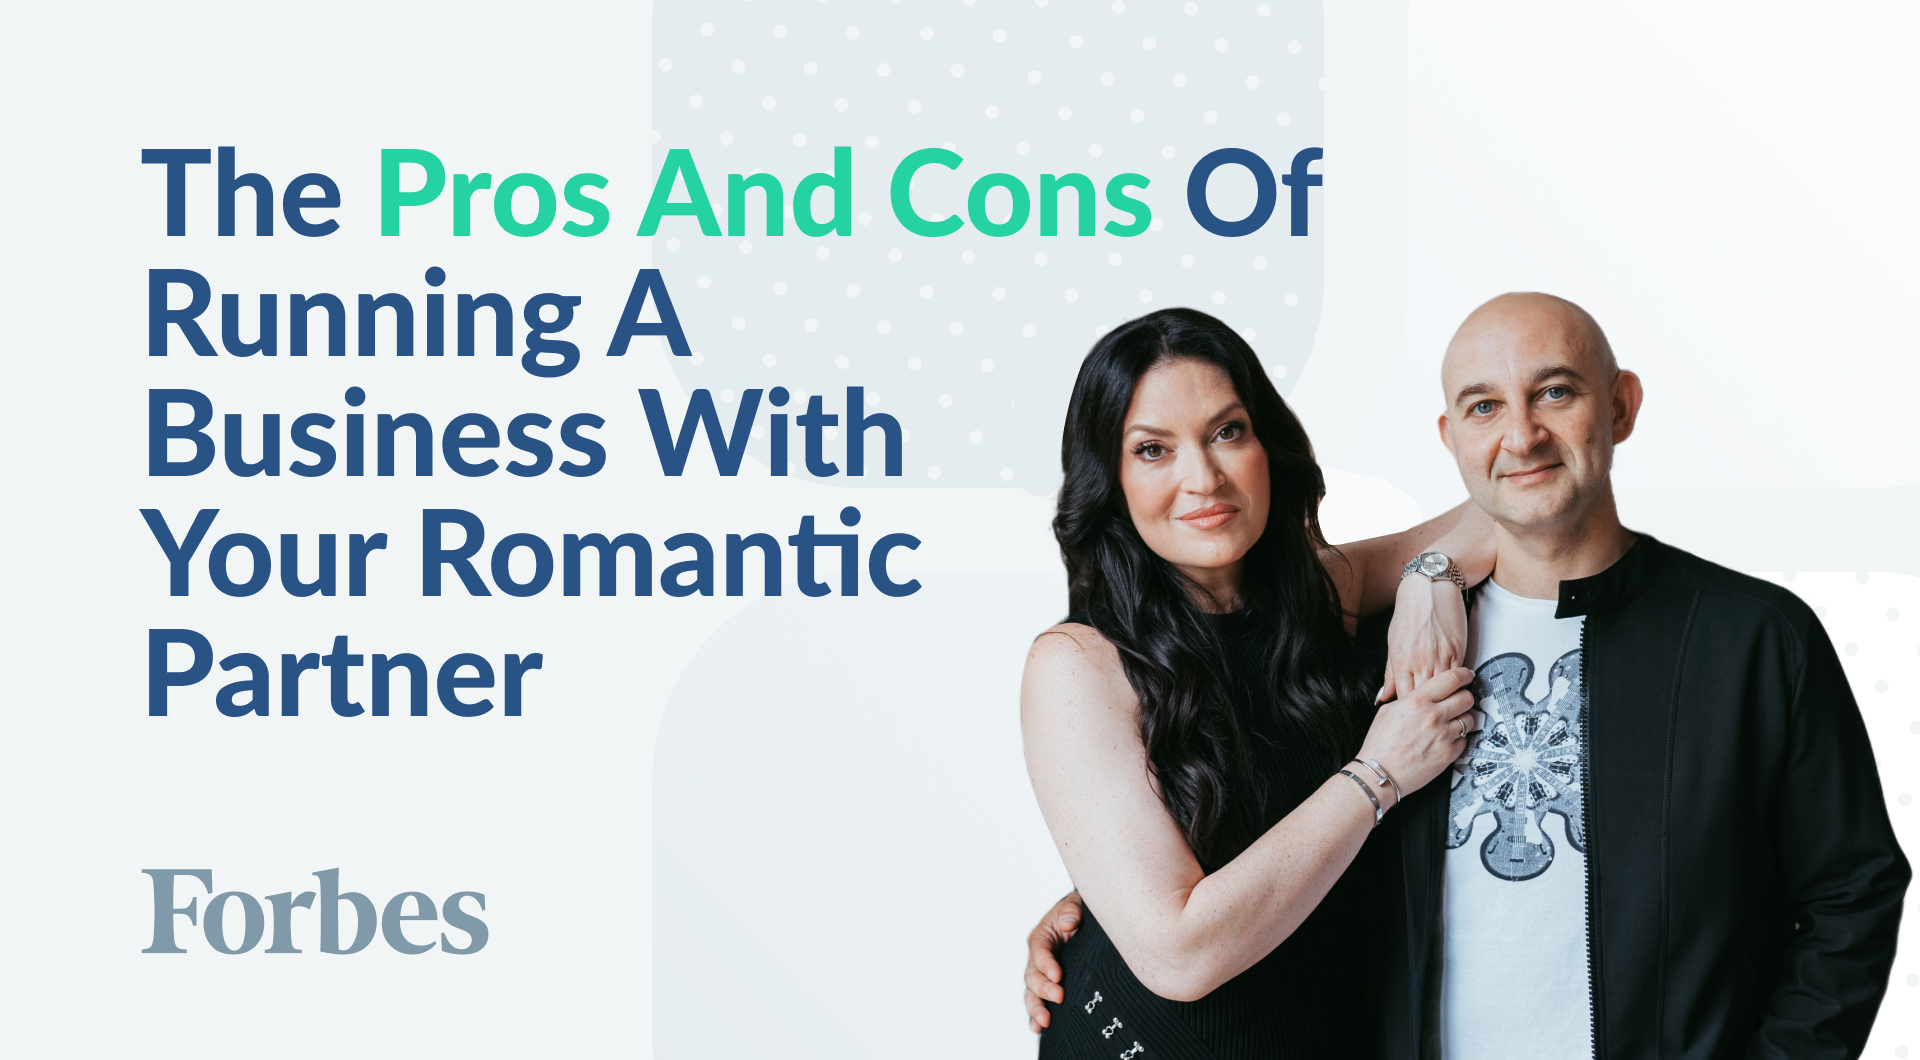 The Pros And Cons Of Running A Business With Your Romantic Partner